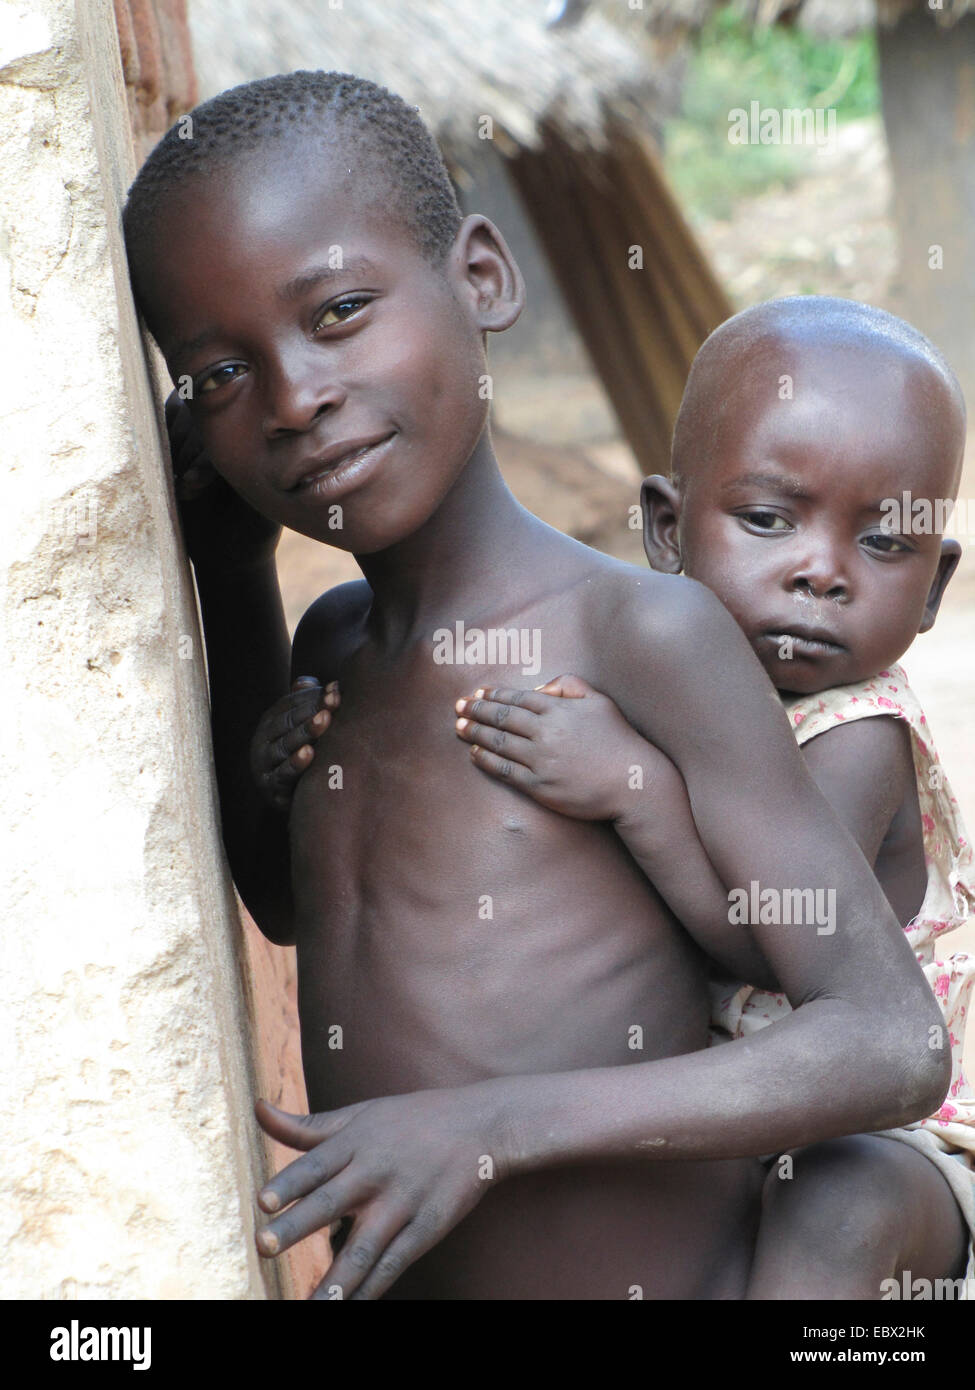 two little children at the refugee camp for internally displaced people in northern Uganda around Gulu, simple mud house in the background, Uganda, Gulu Stock Photo